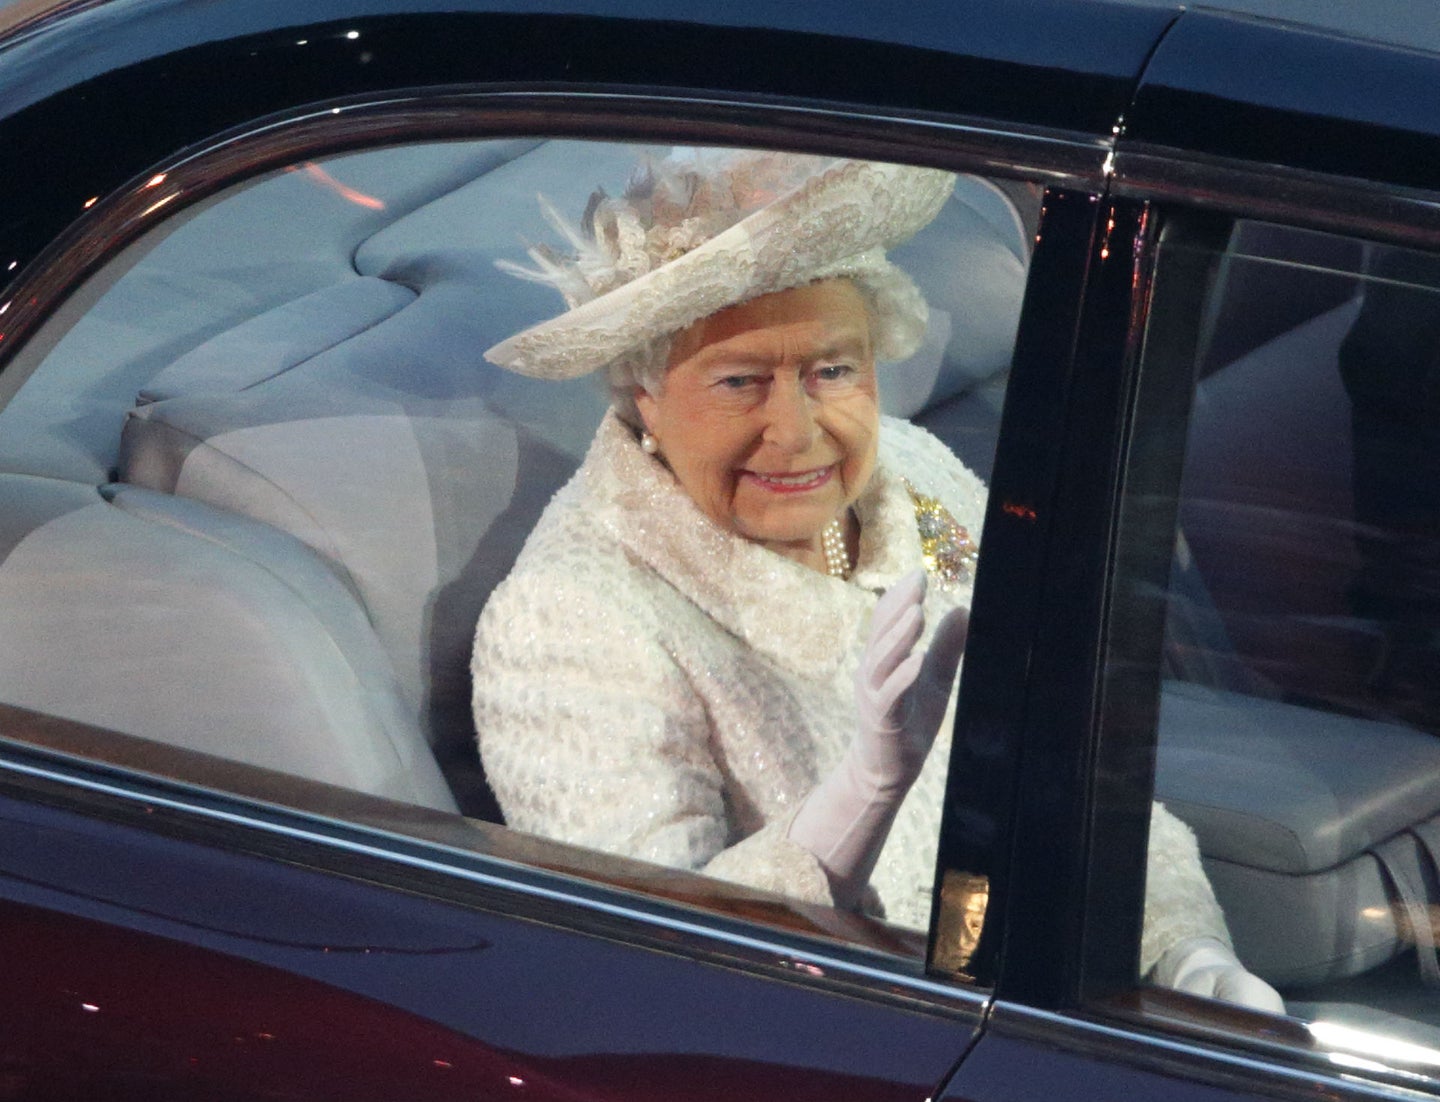 Somebody Called the Cops on the Queen of England for Not Wearing a Seatbelt